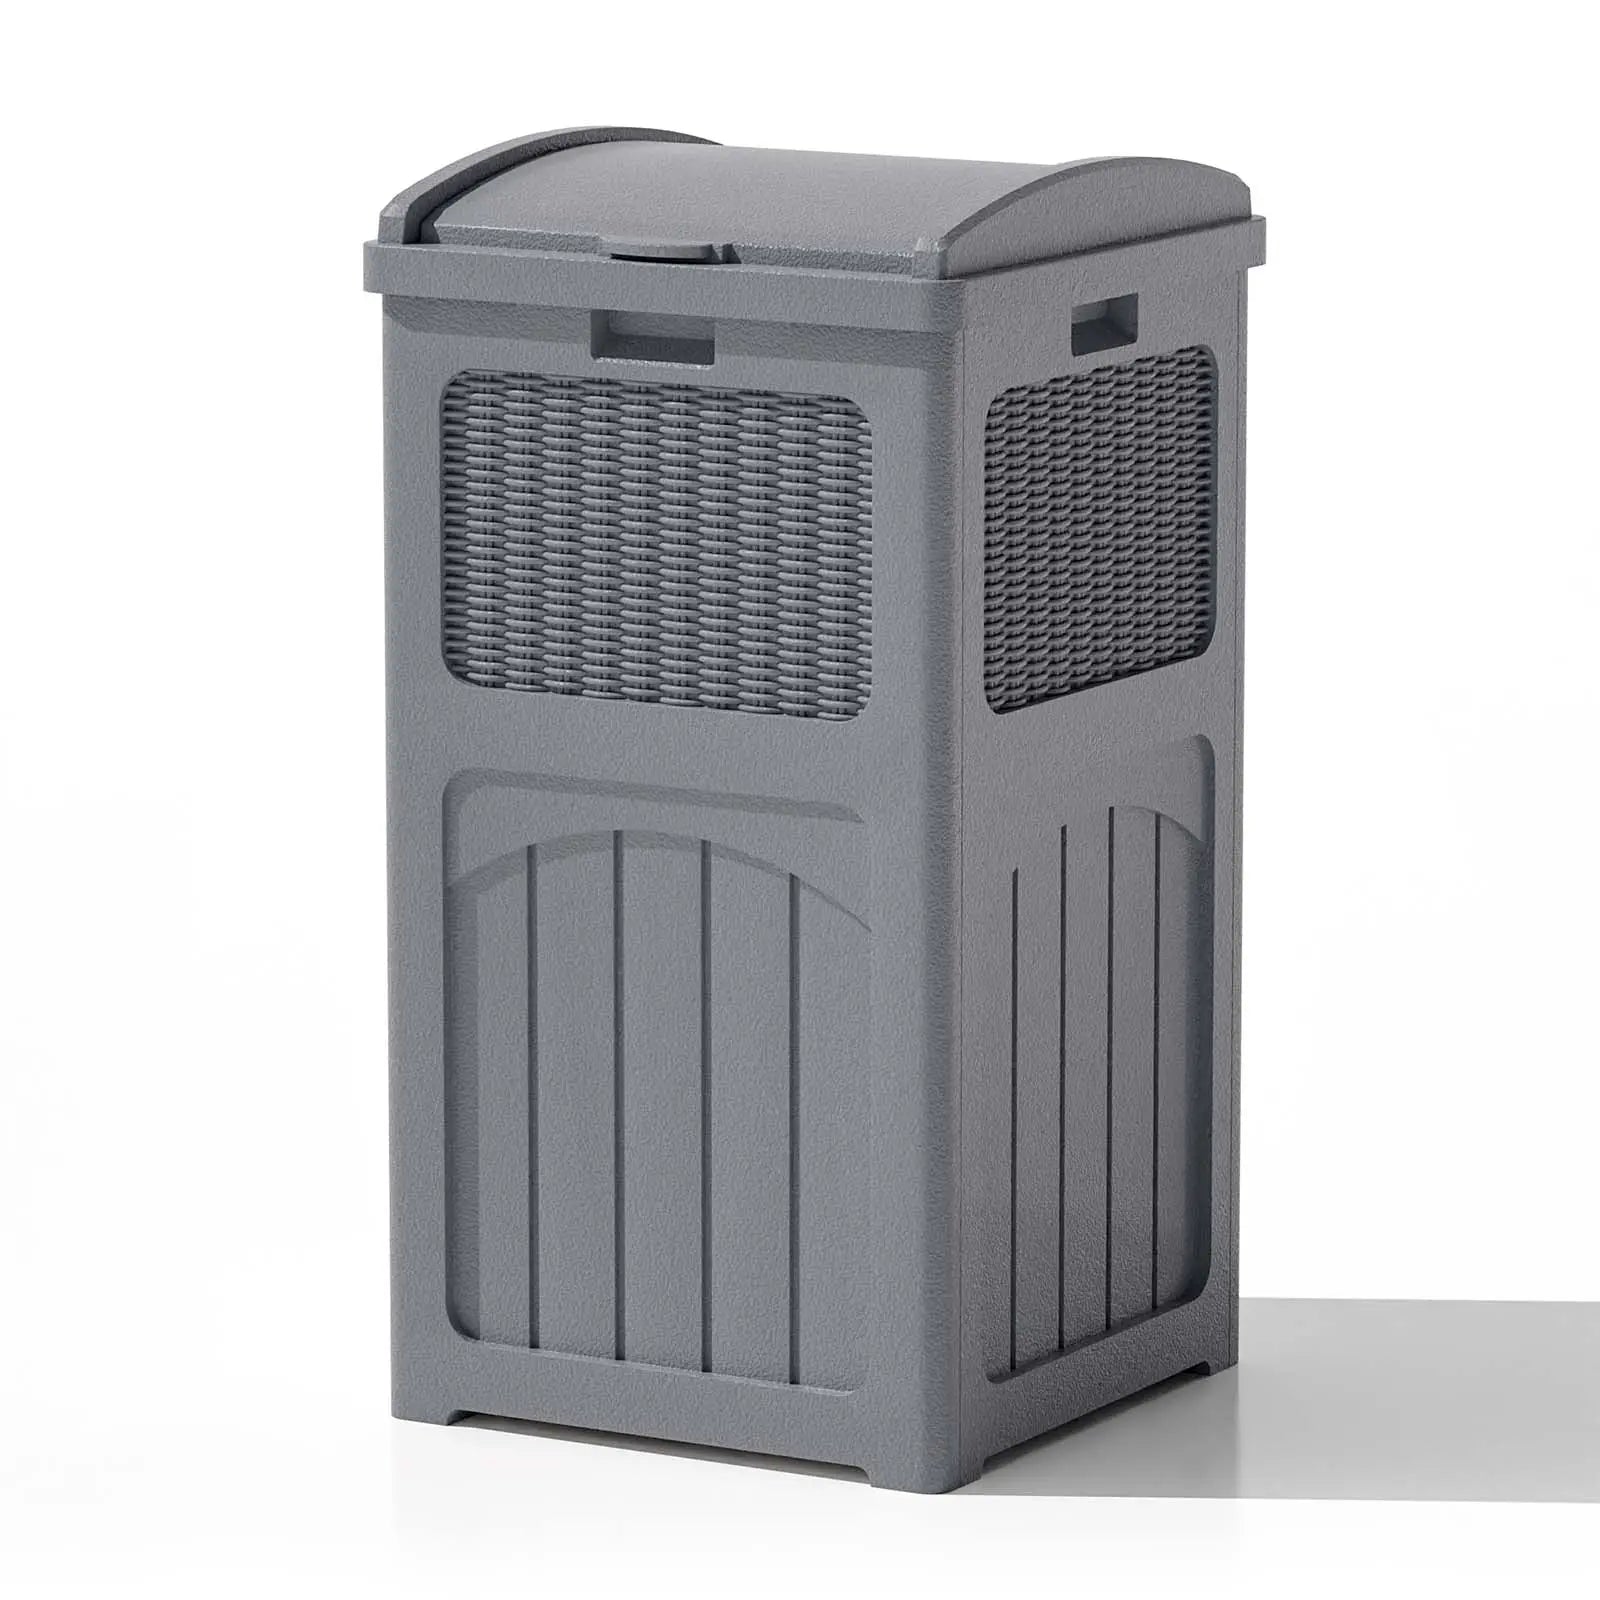 Patiowell 36 Gallon Resin Trash Can-Cool Gray